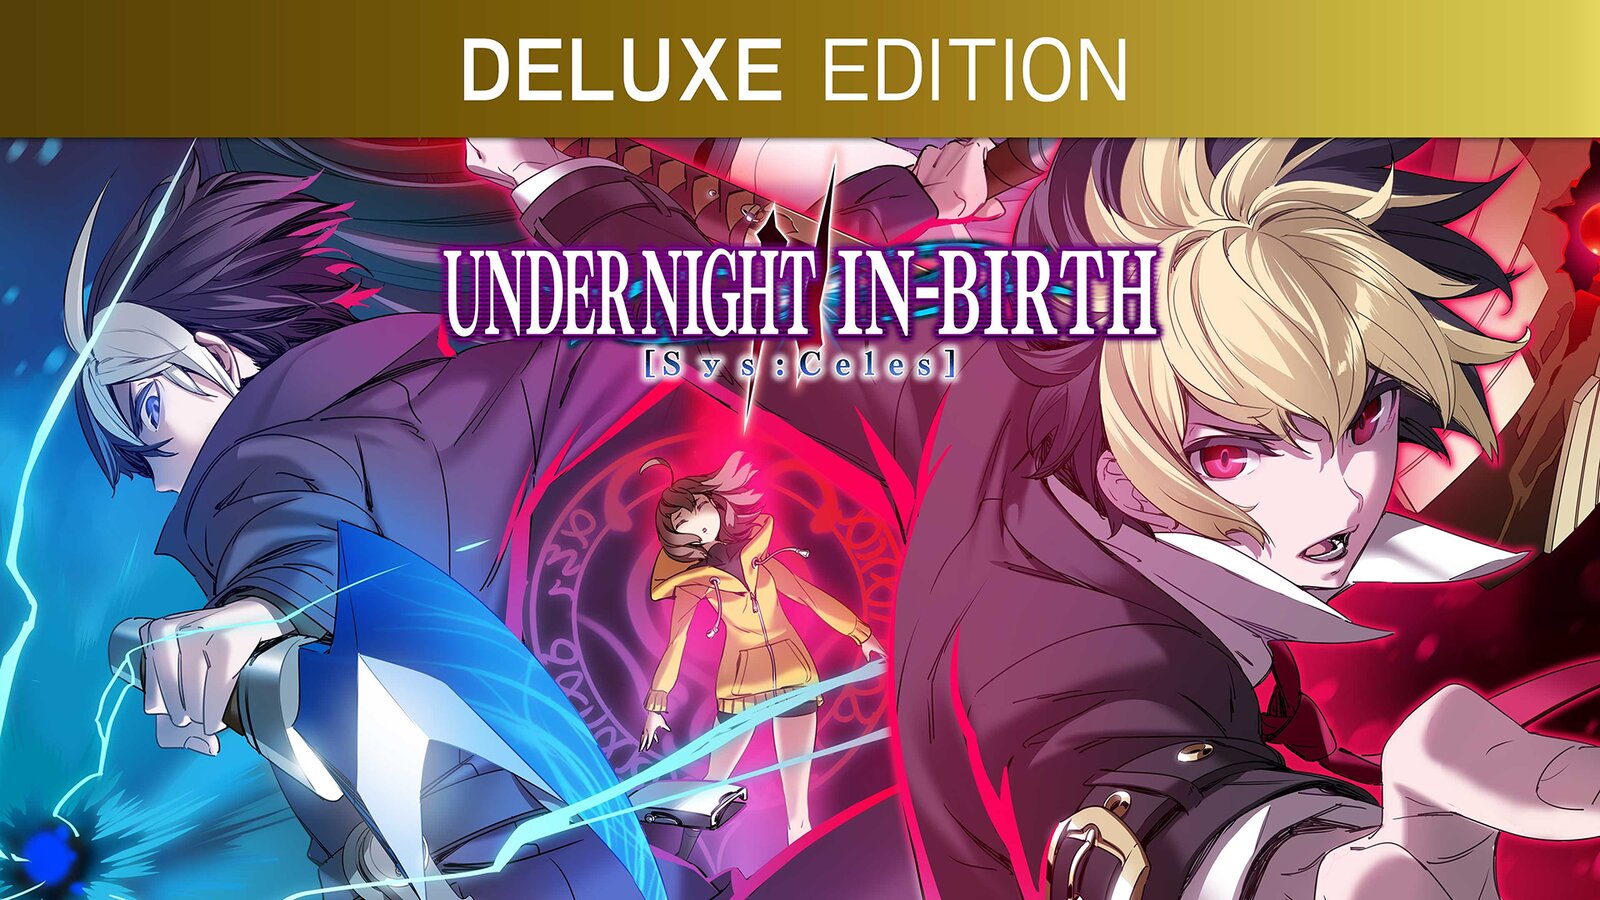 Under Night In-Birth II Sys:Celes - Deluxe Edition